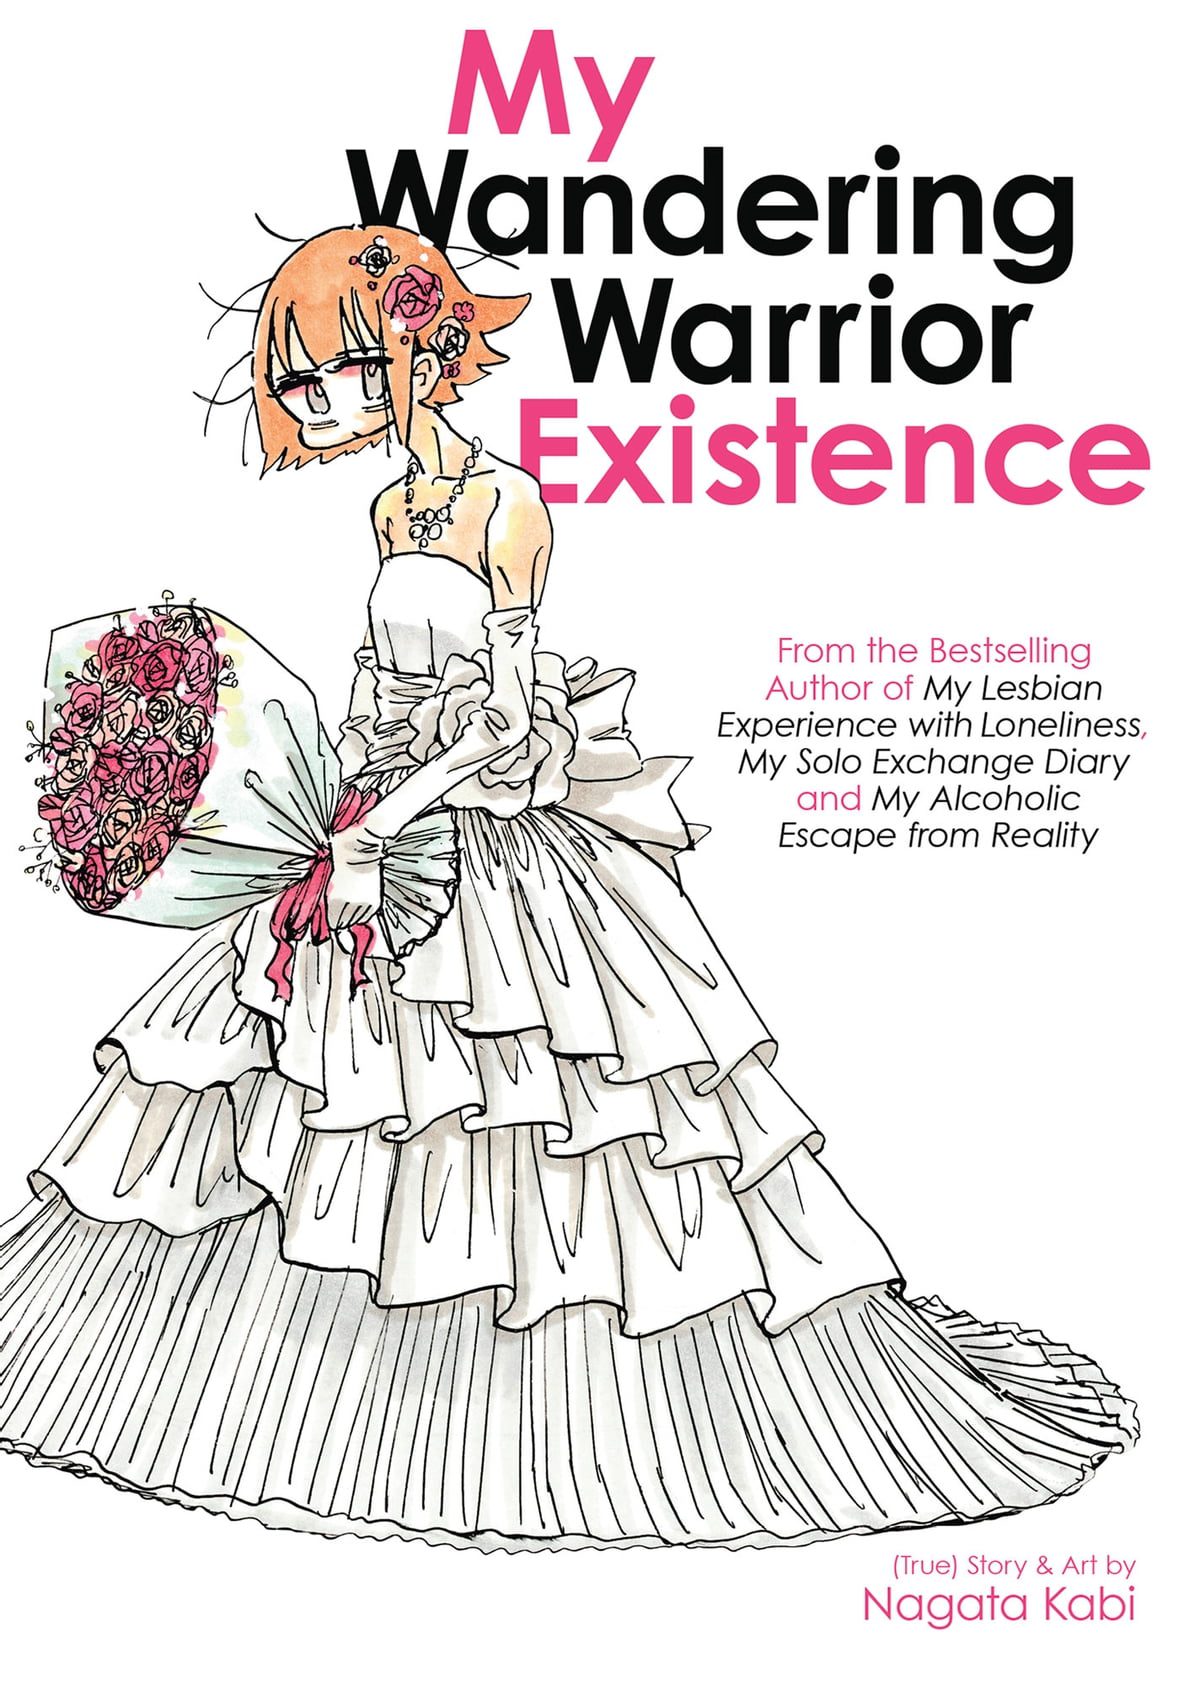 My Wandering Warrior Existence book cover